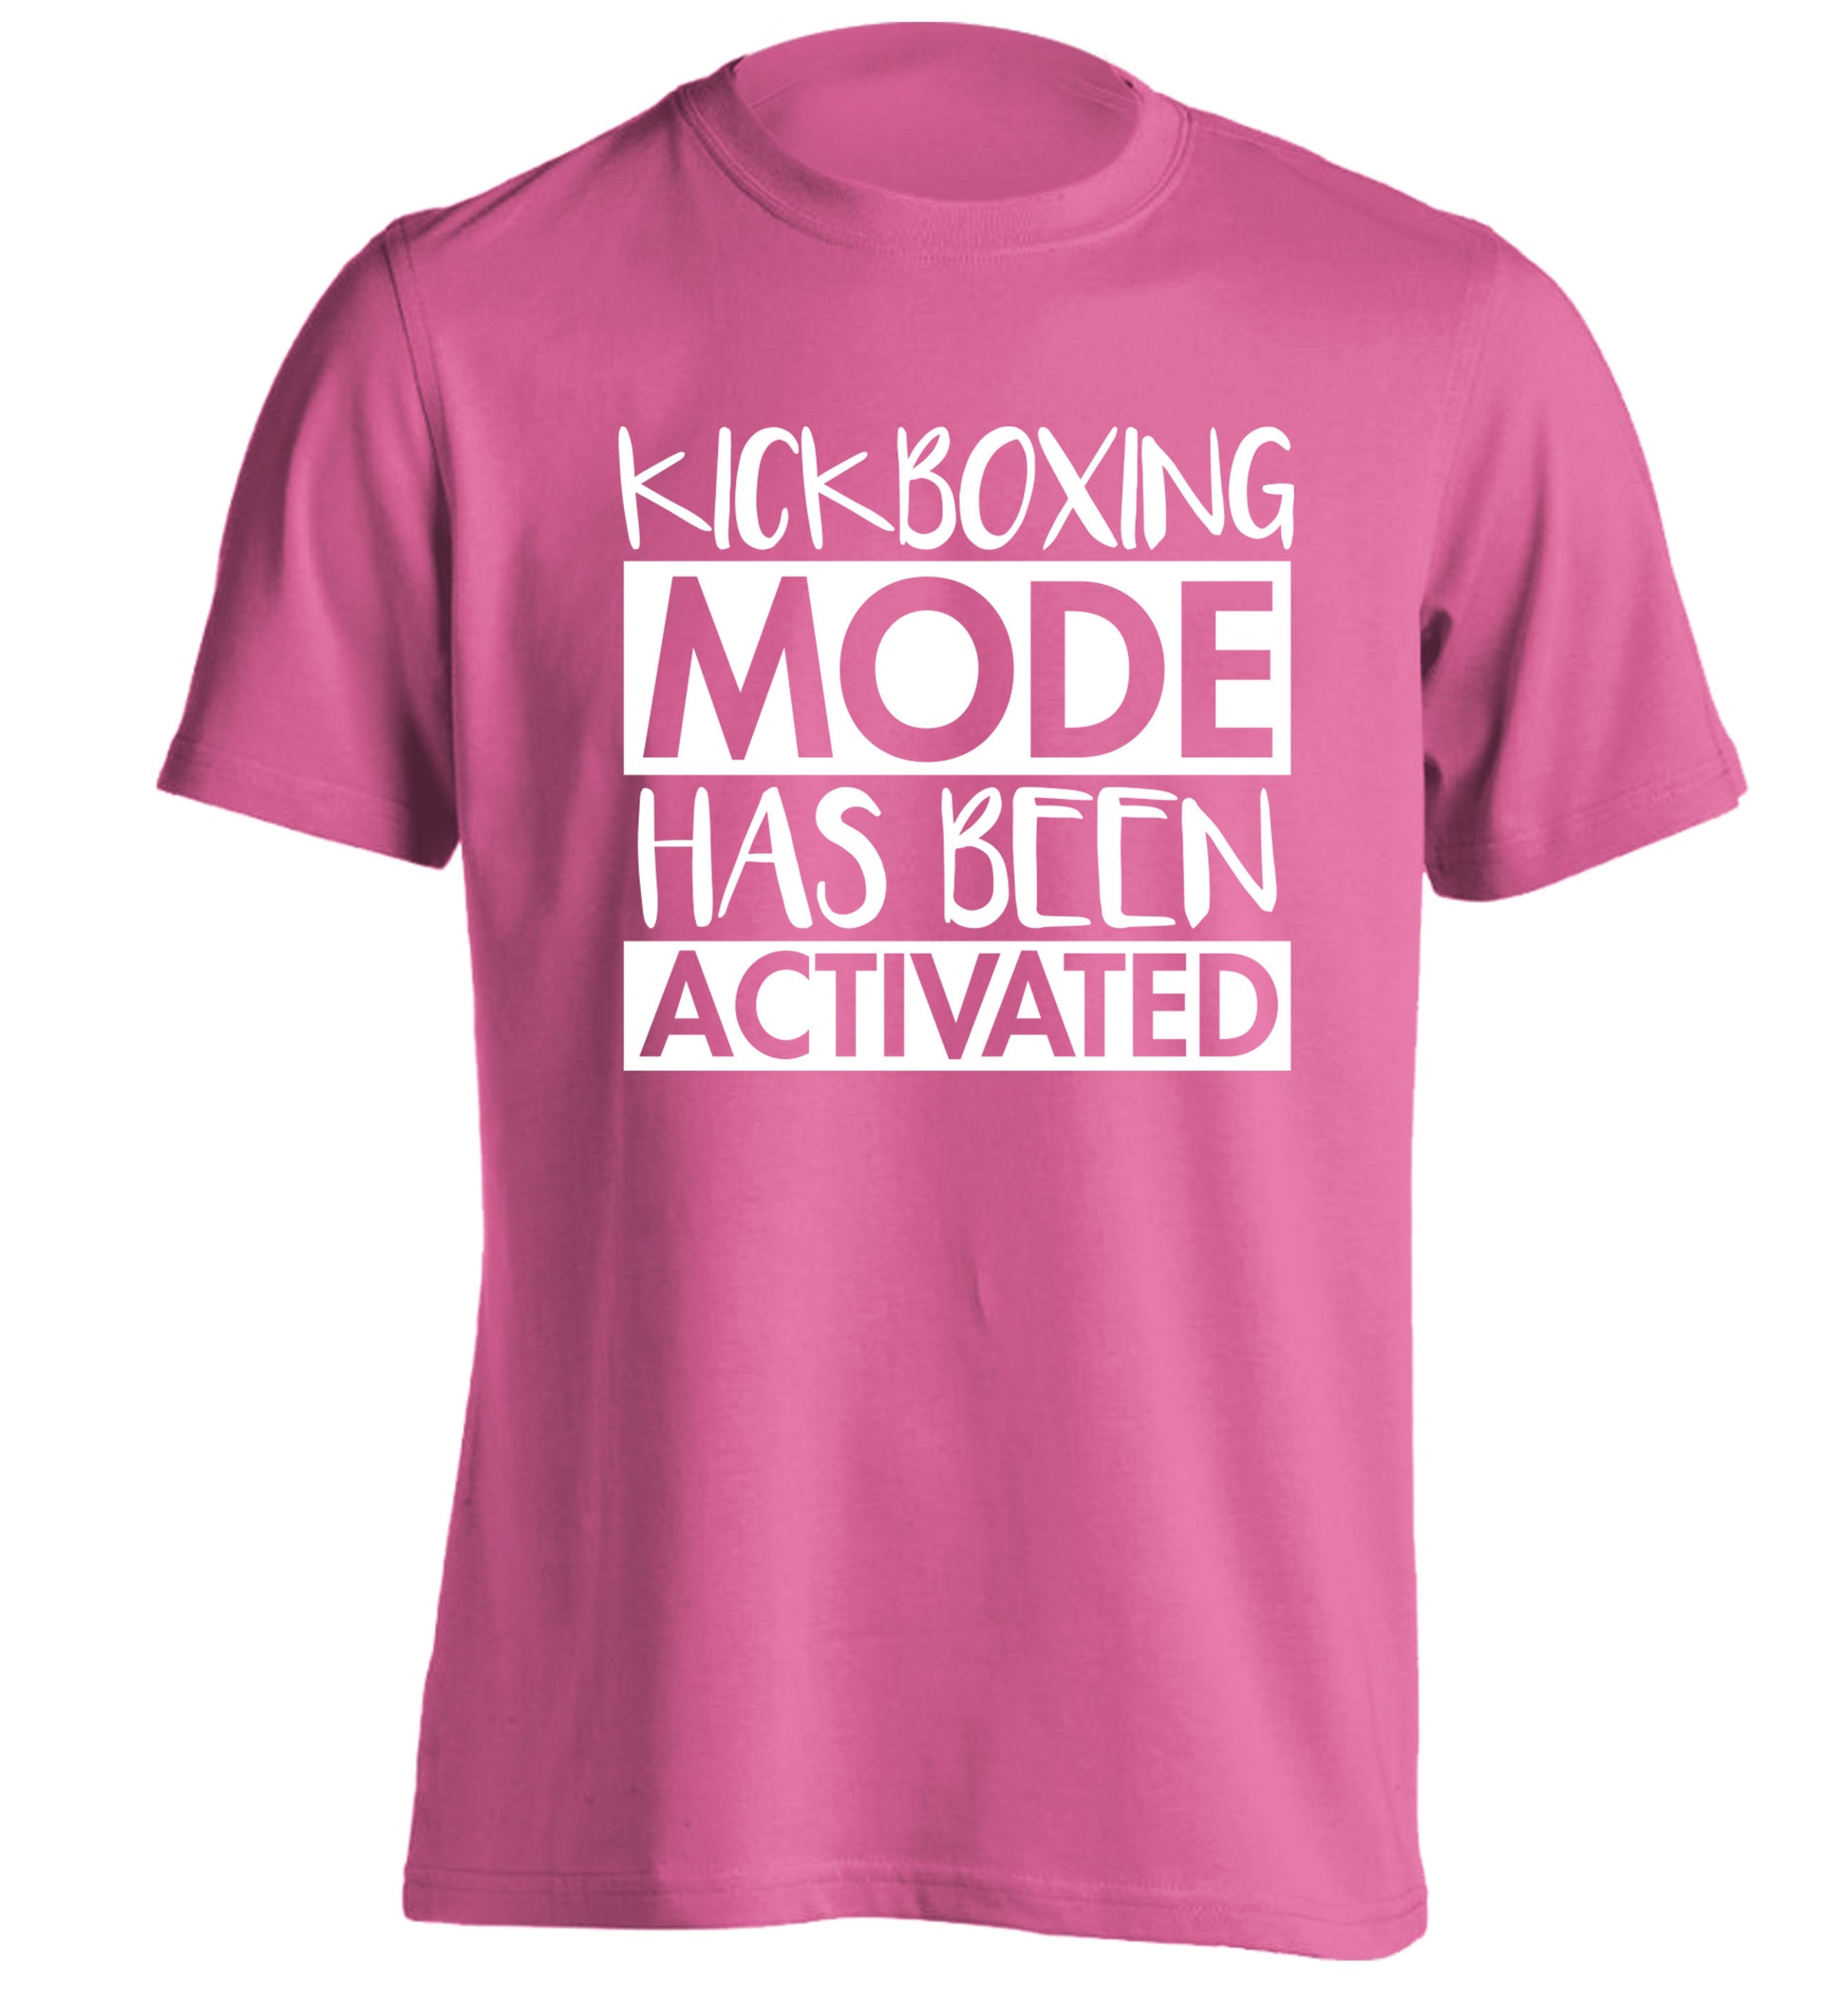 Kickboxing mode activated adults unisex pink Tshirt 2XL